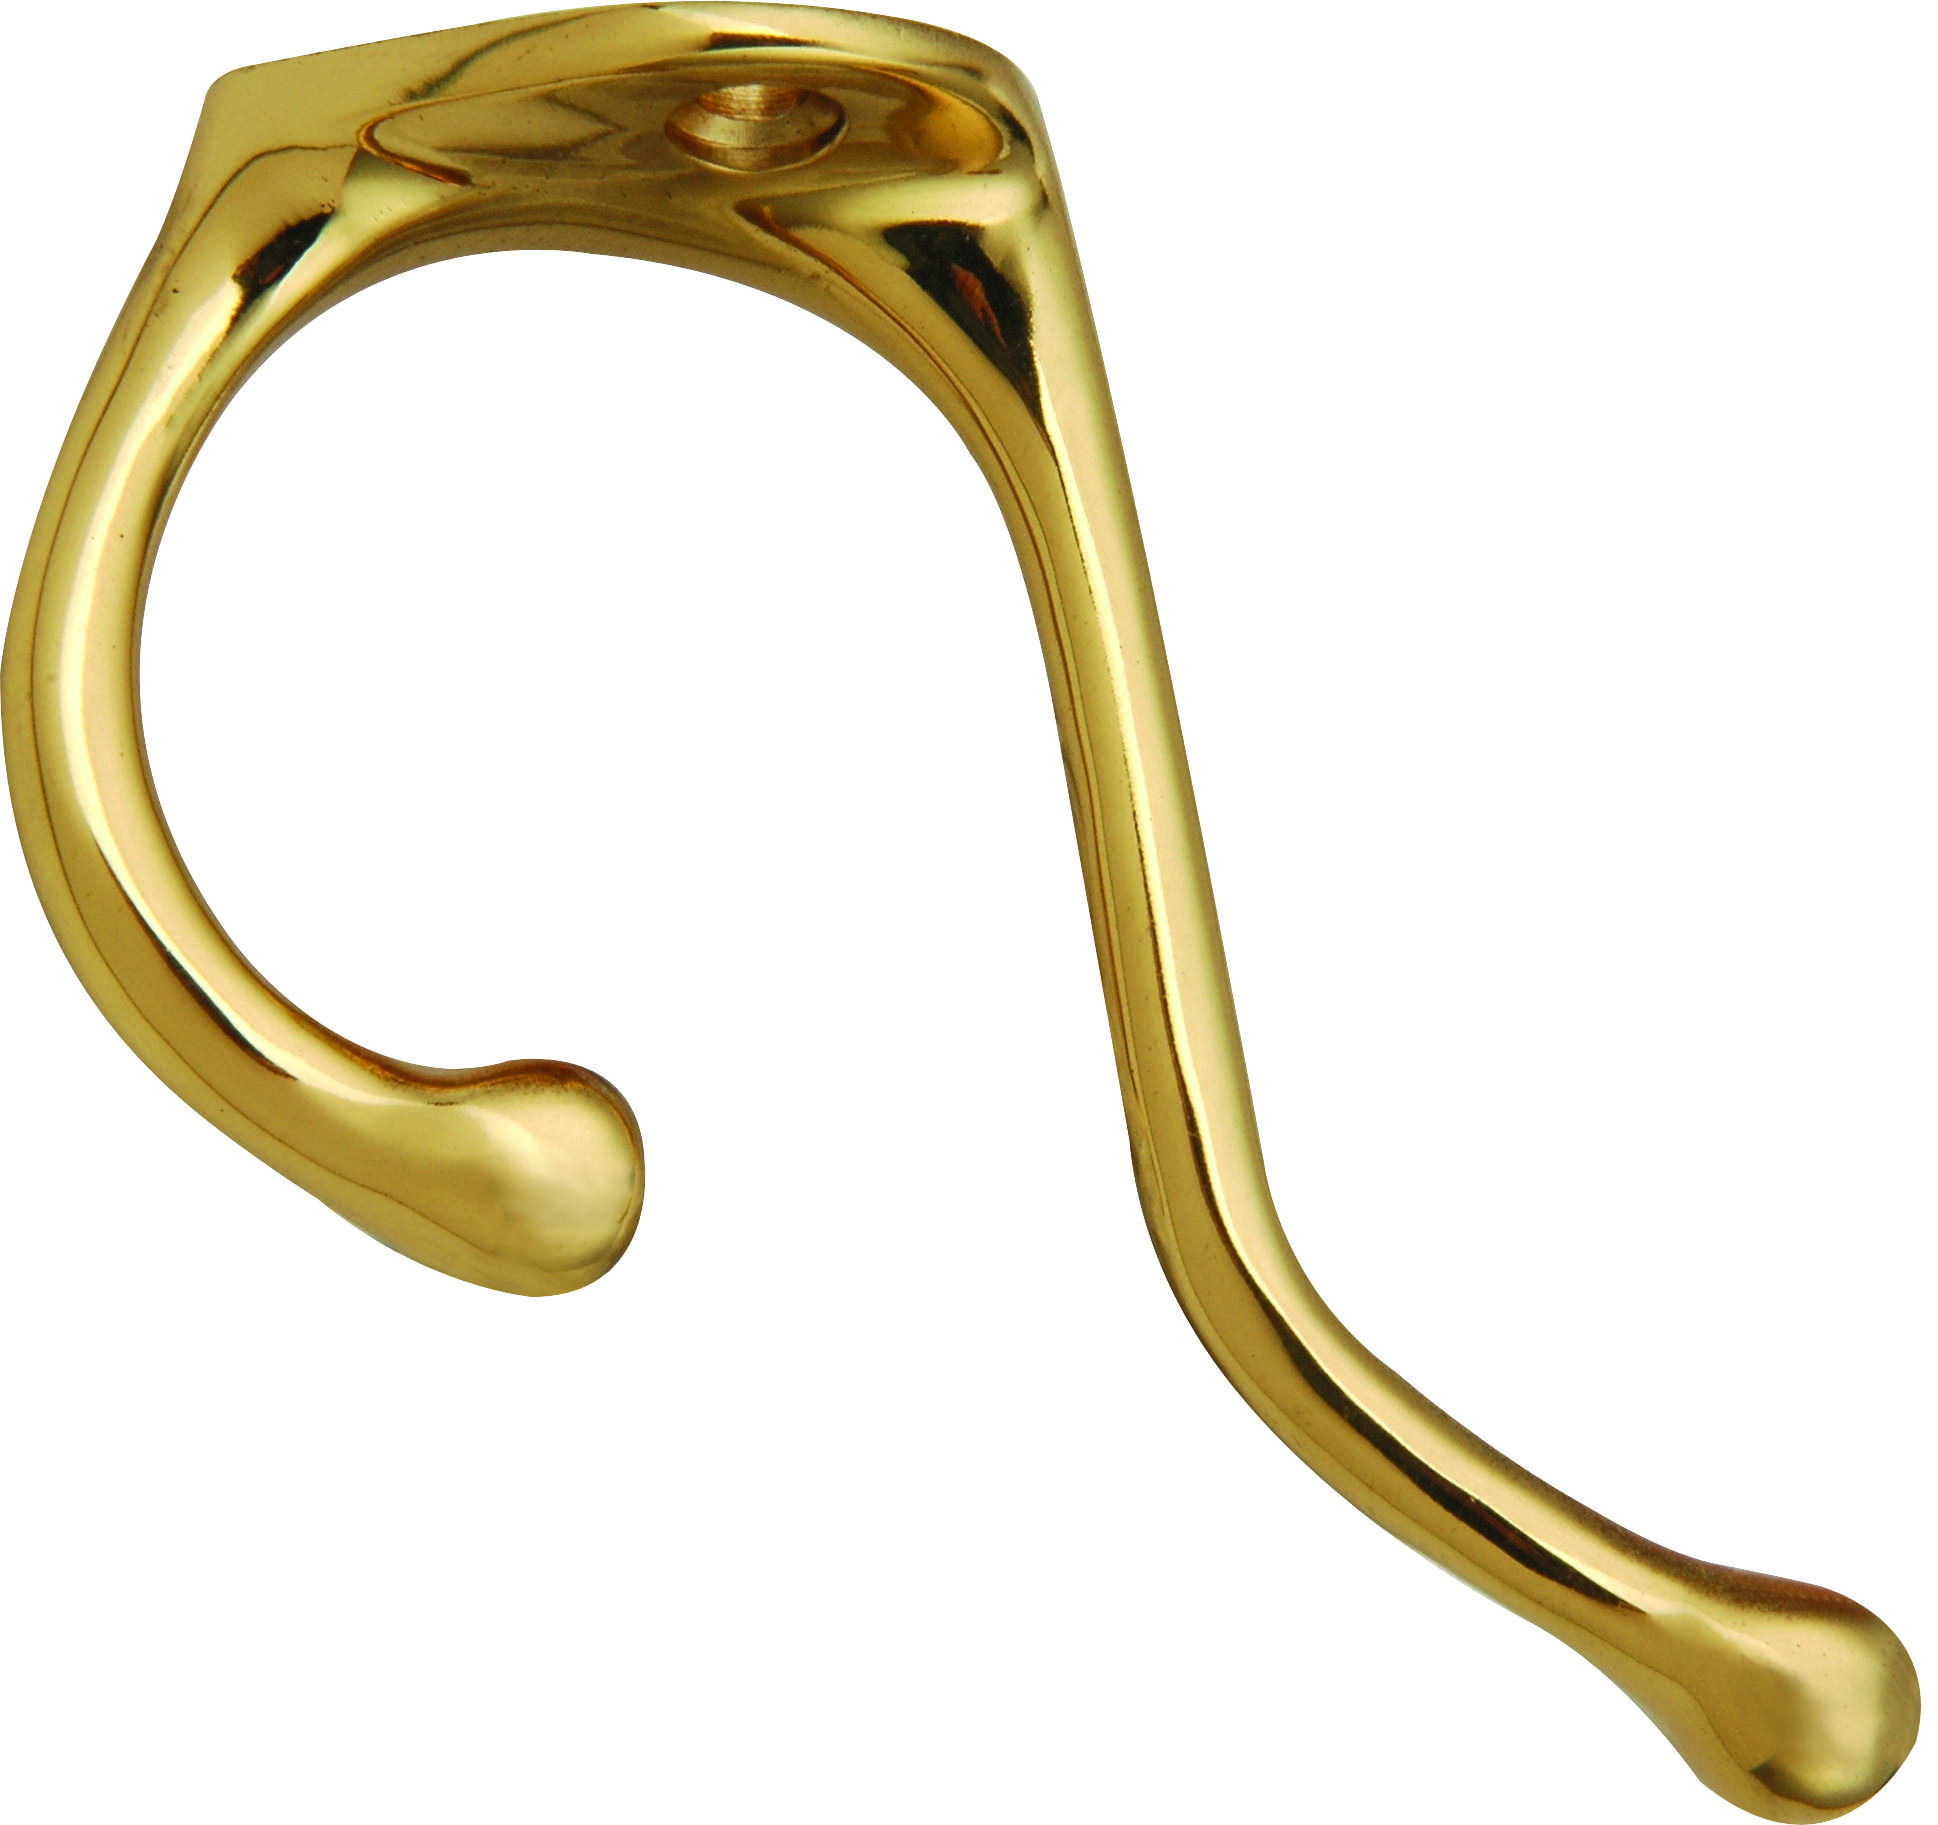  Polish Brass Coat And Hat Hook